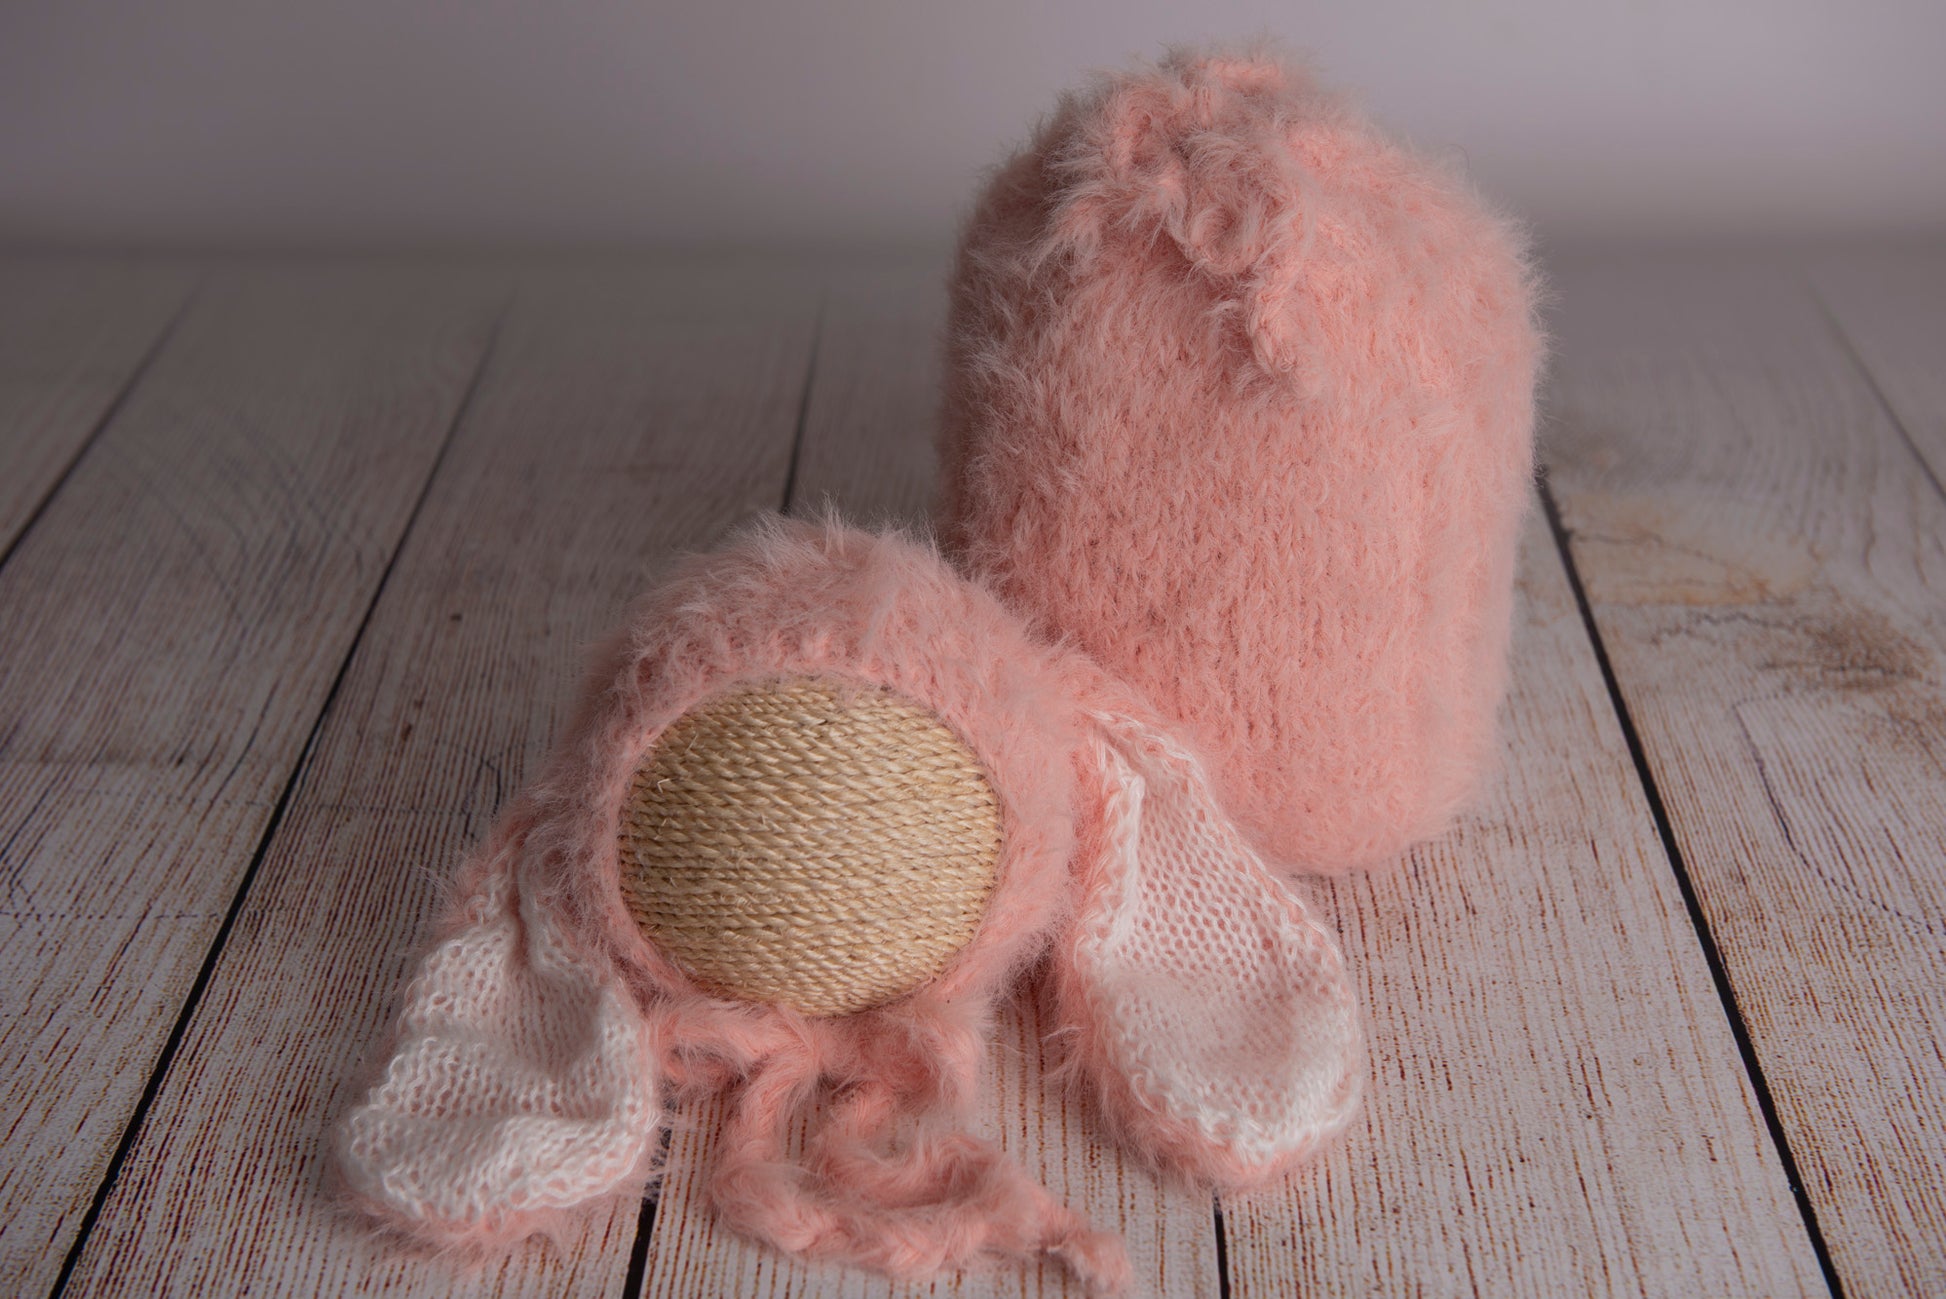 Newborn photography clothing set featuring a beige rabbit ears bonnet and matching sack, displayed on a wooden surface with a soft-focus background.